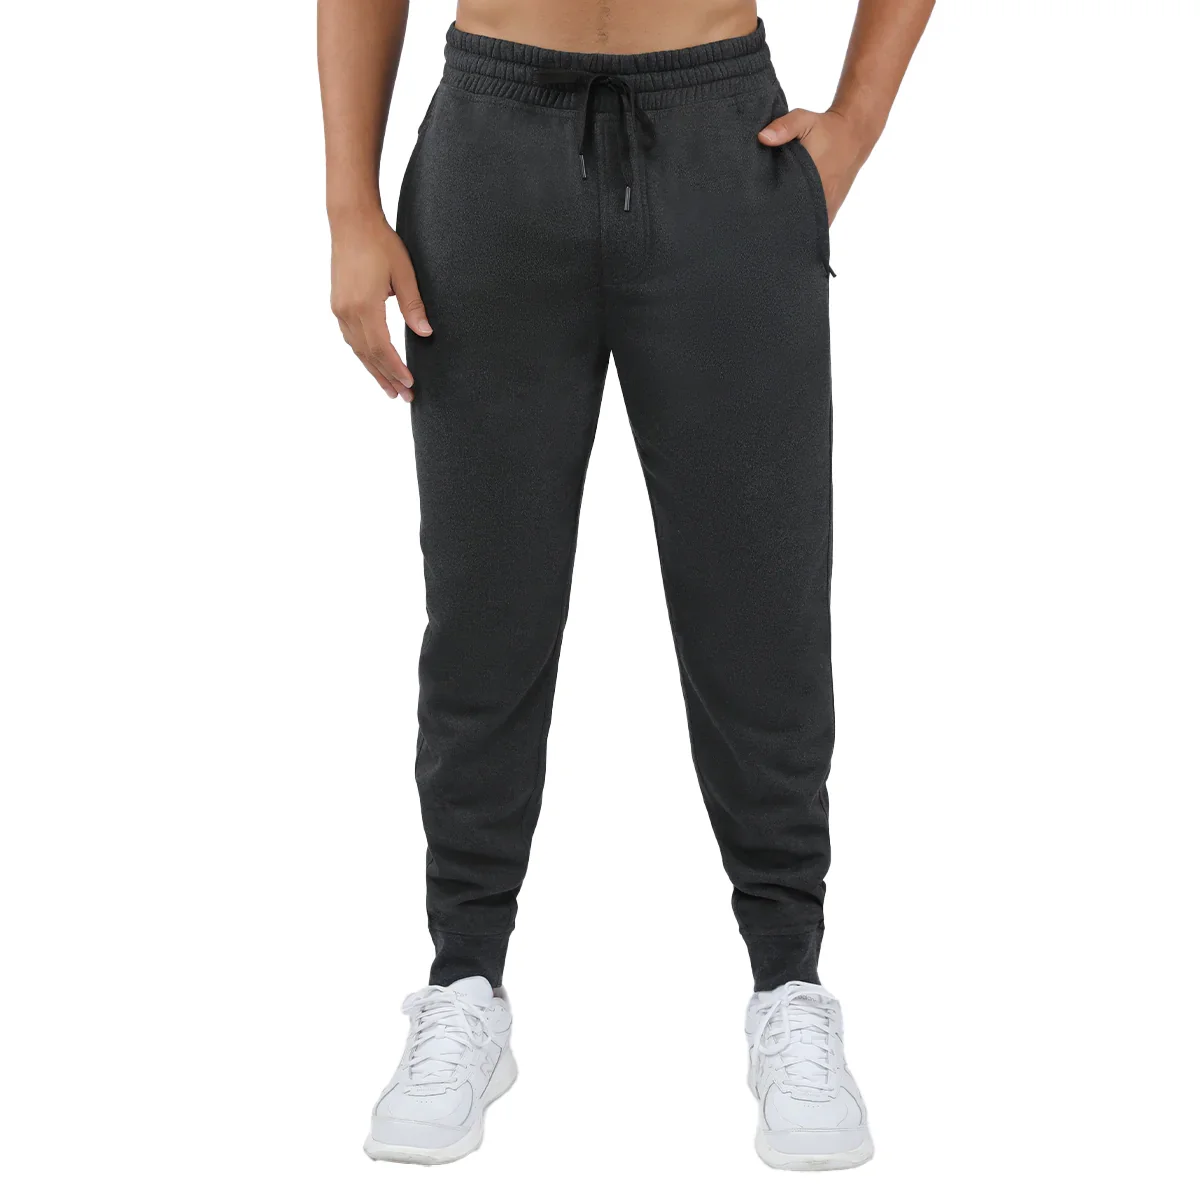 Image of 90 Degree Men's Jogger Pants with Zipper Pockets